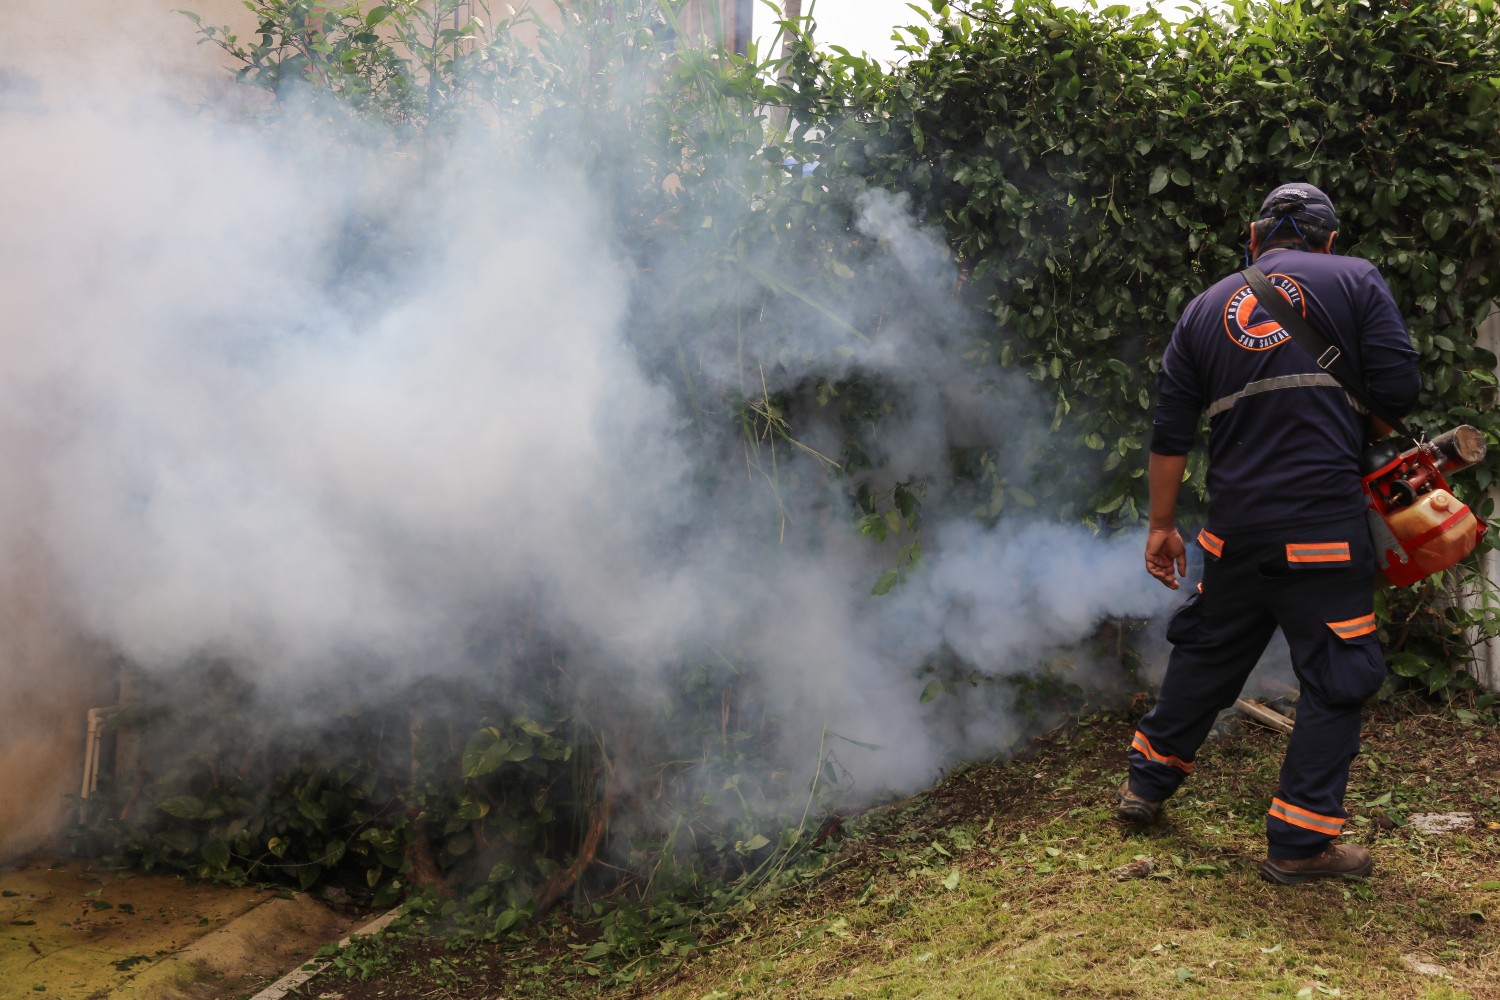 CDC Warns Americans of Increased Dengue Fever Risk